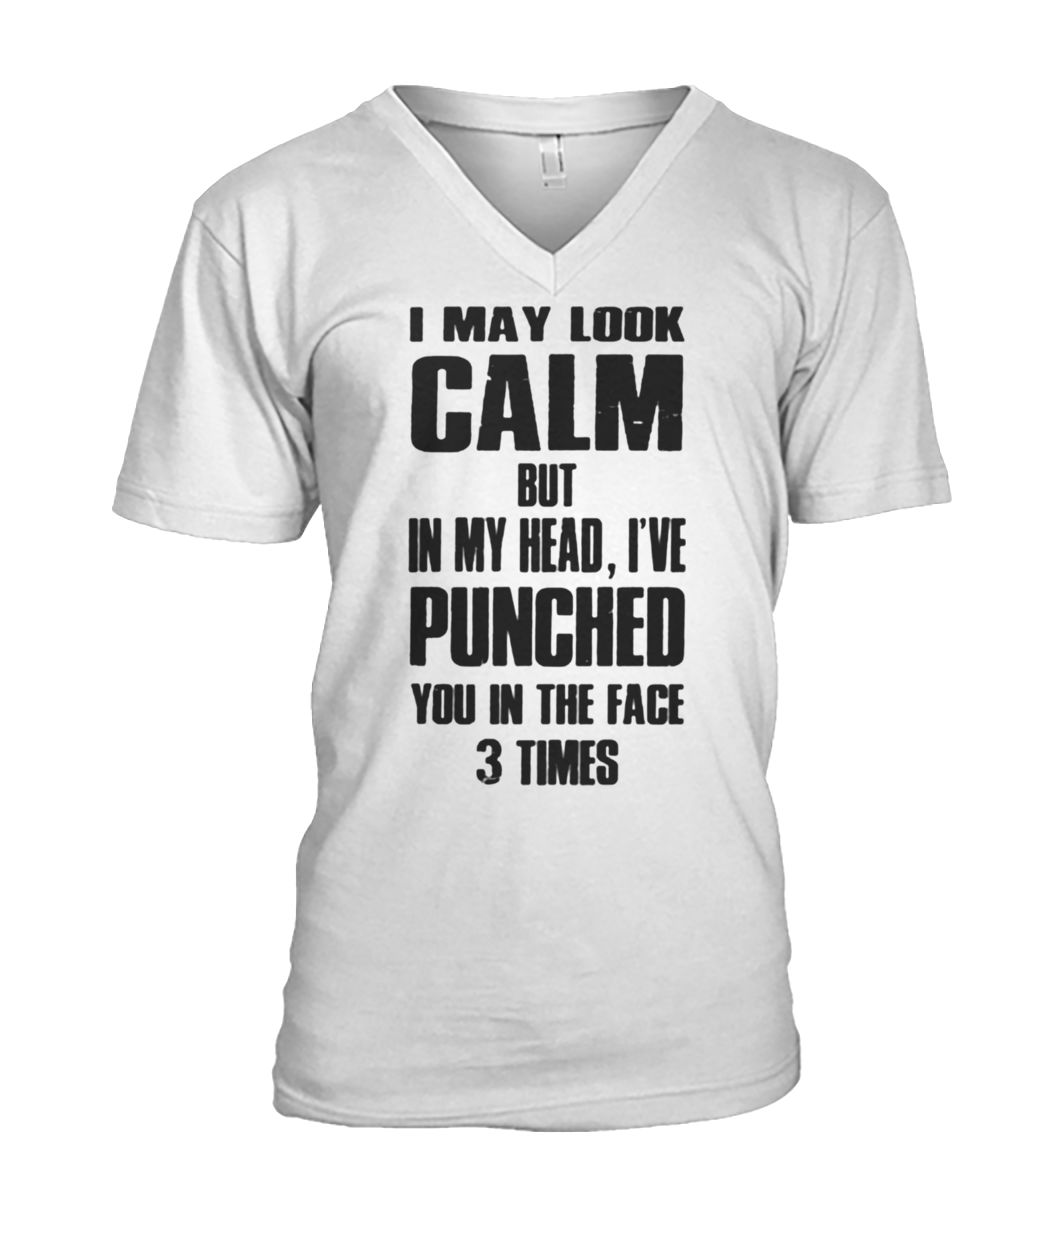 I may look calm but in my head I've punched you in your face 3 times mens v-neck